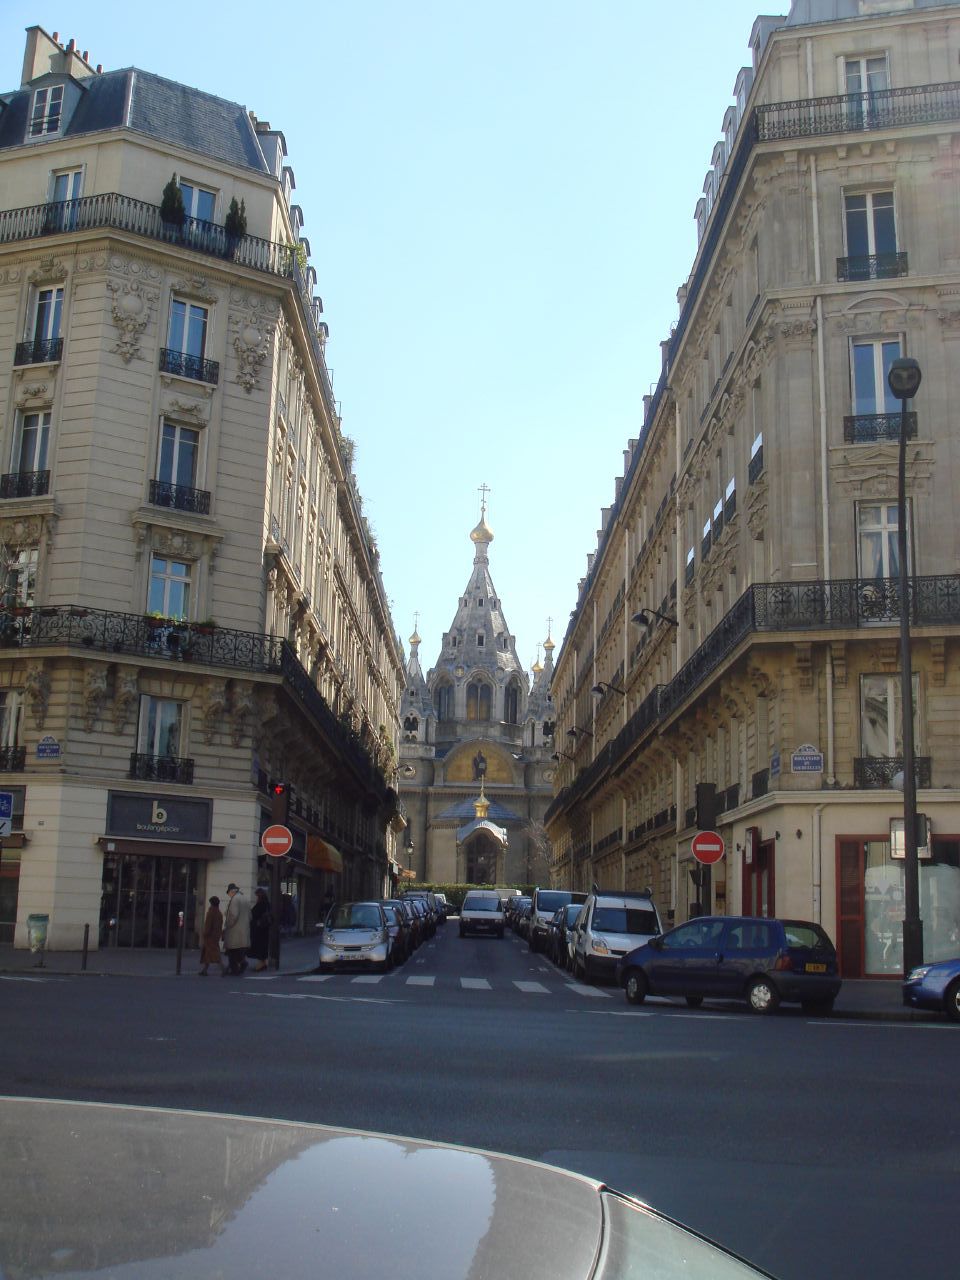 a street in a city with many buildings and traffic